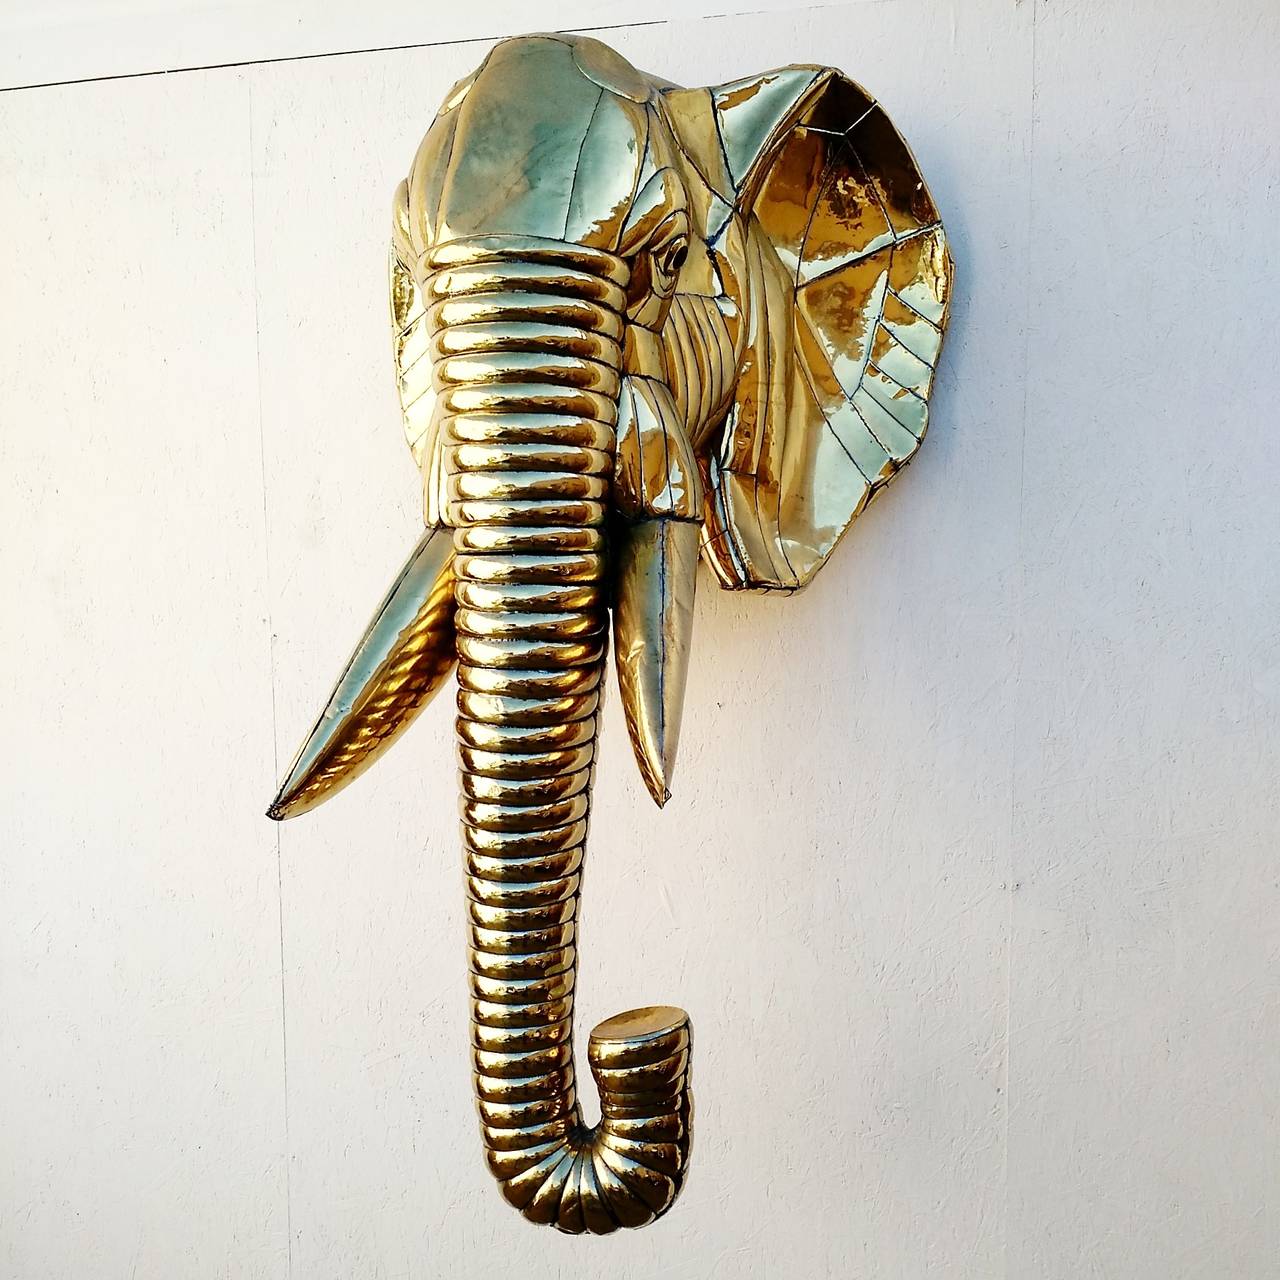 Fabulous lifesize elephant head sculpture, Mexico, circa 1970s.
Designed by Sergio Bustamante done in gleaming brass.
At 6' tall and 3' wide it is a striking piece of modernist art.
Unsigned.